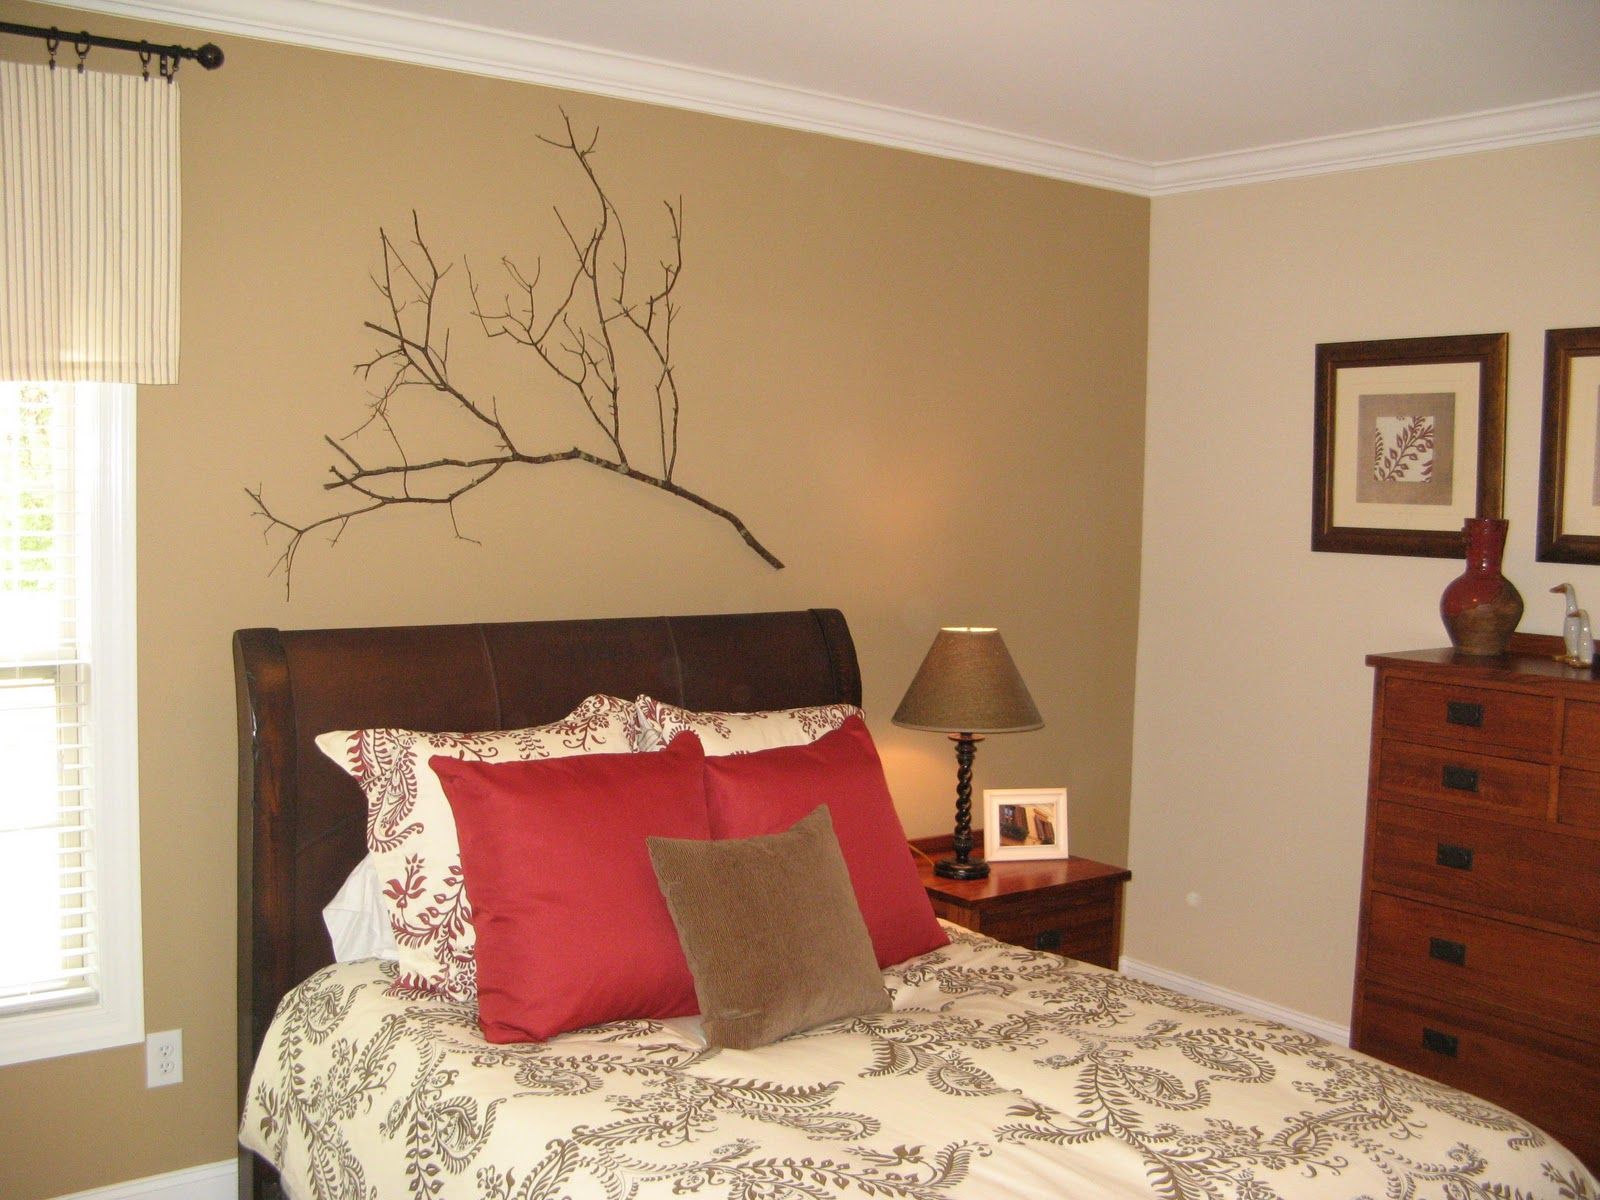 Susan Snyder: Tree Branch Wall Art Pertaining To Most Recently Released Branches Wood Wall Art (View 13 of 20)